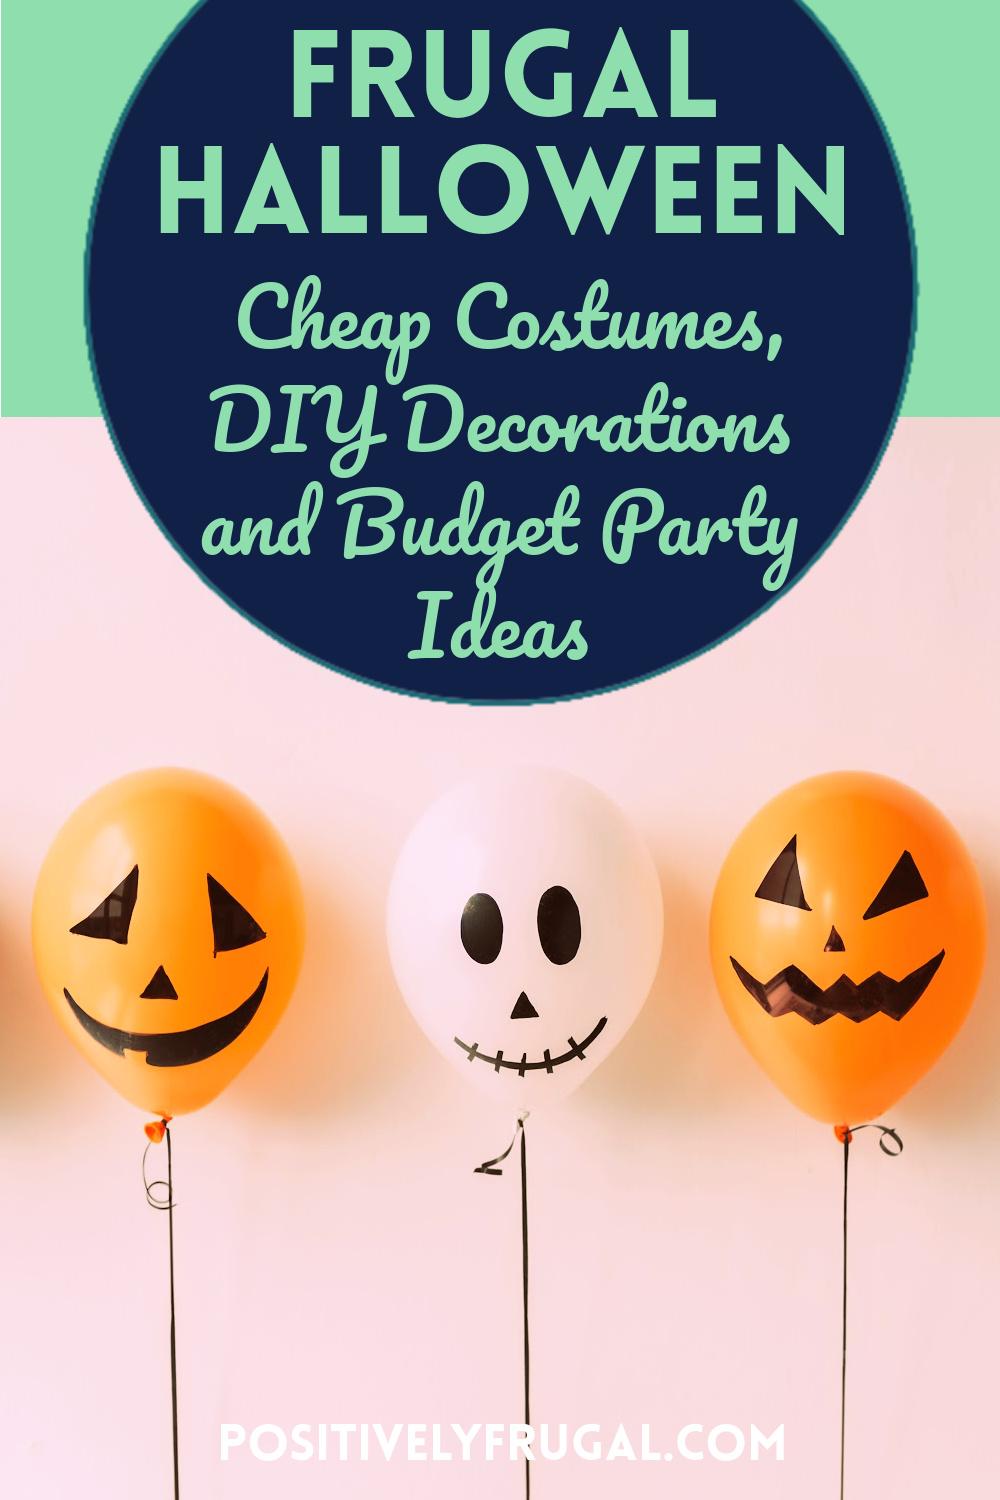 Frugal Halloween Cheap Costumes Decorations Party Ideas by PositivelyFrugal.com